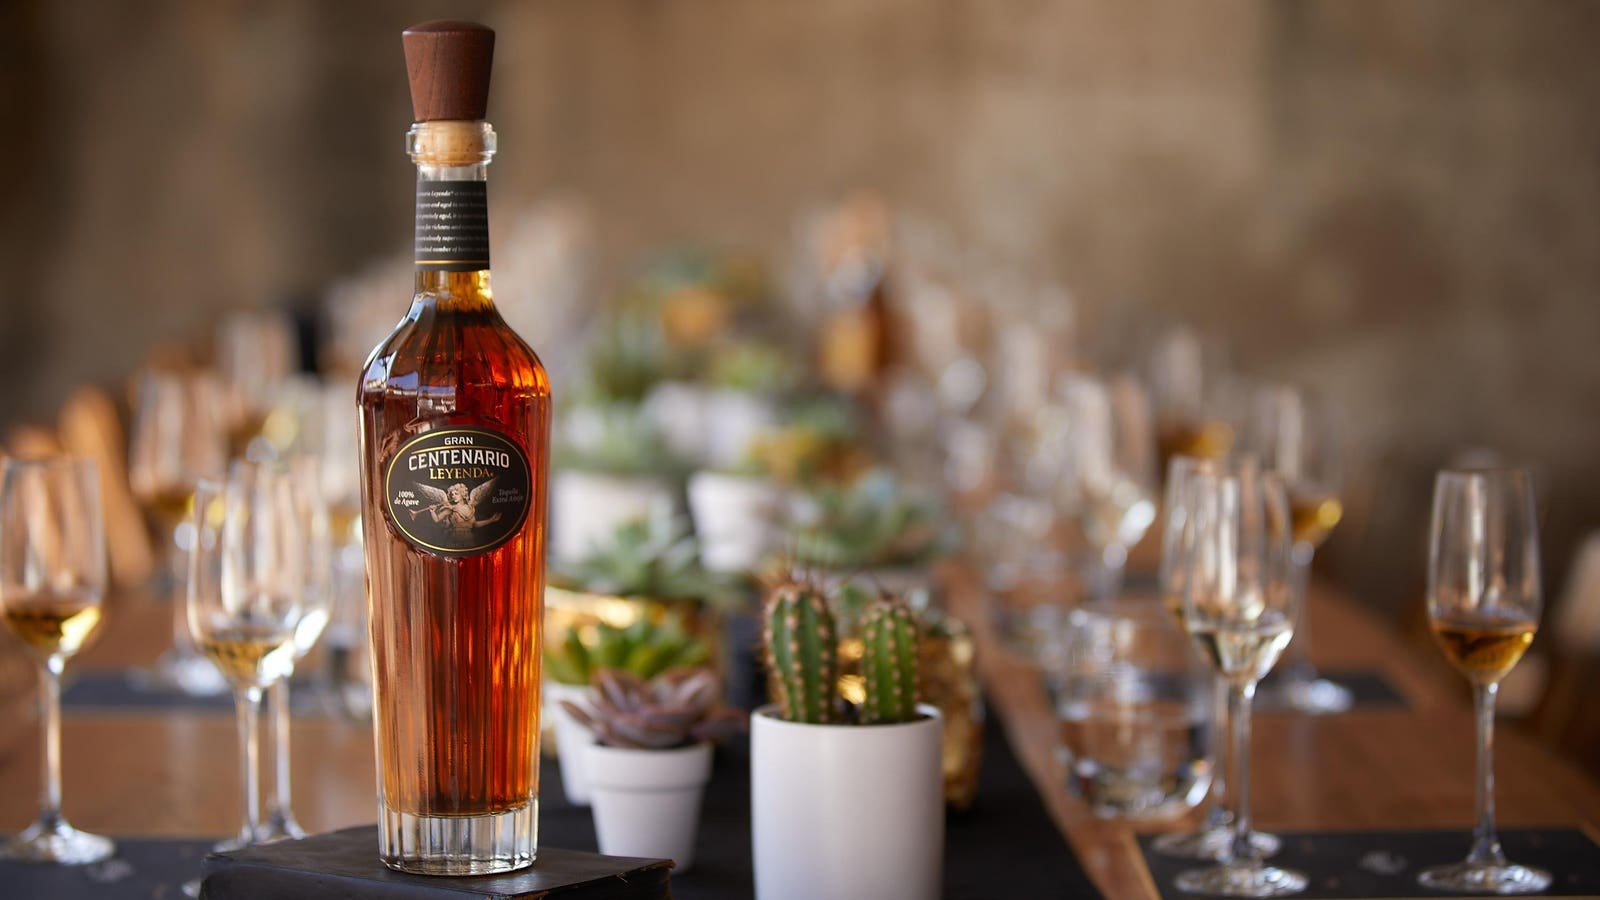 The Top Ten Best Sipping Tequilas To Upgrade Your Home Bar